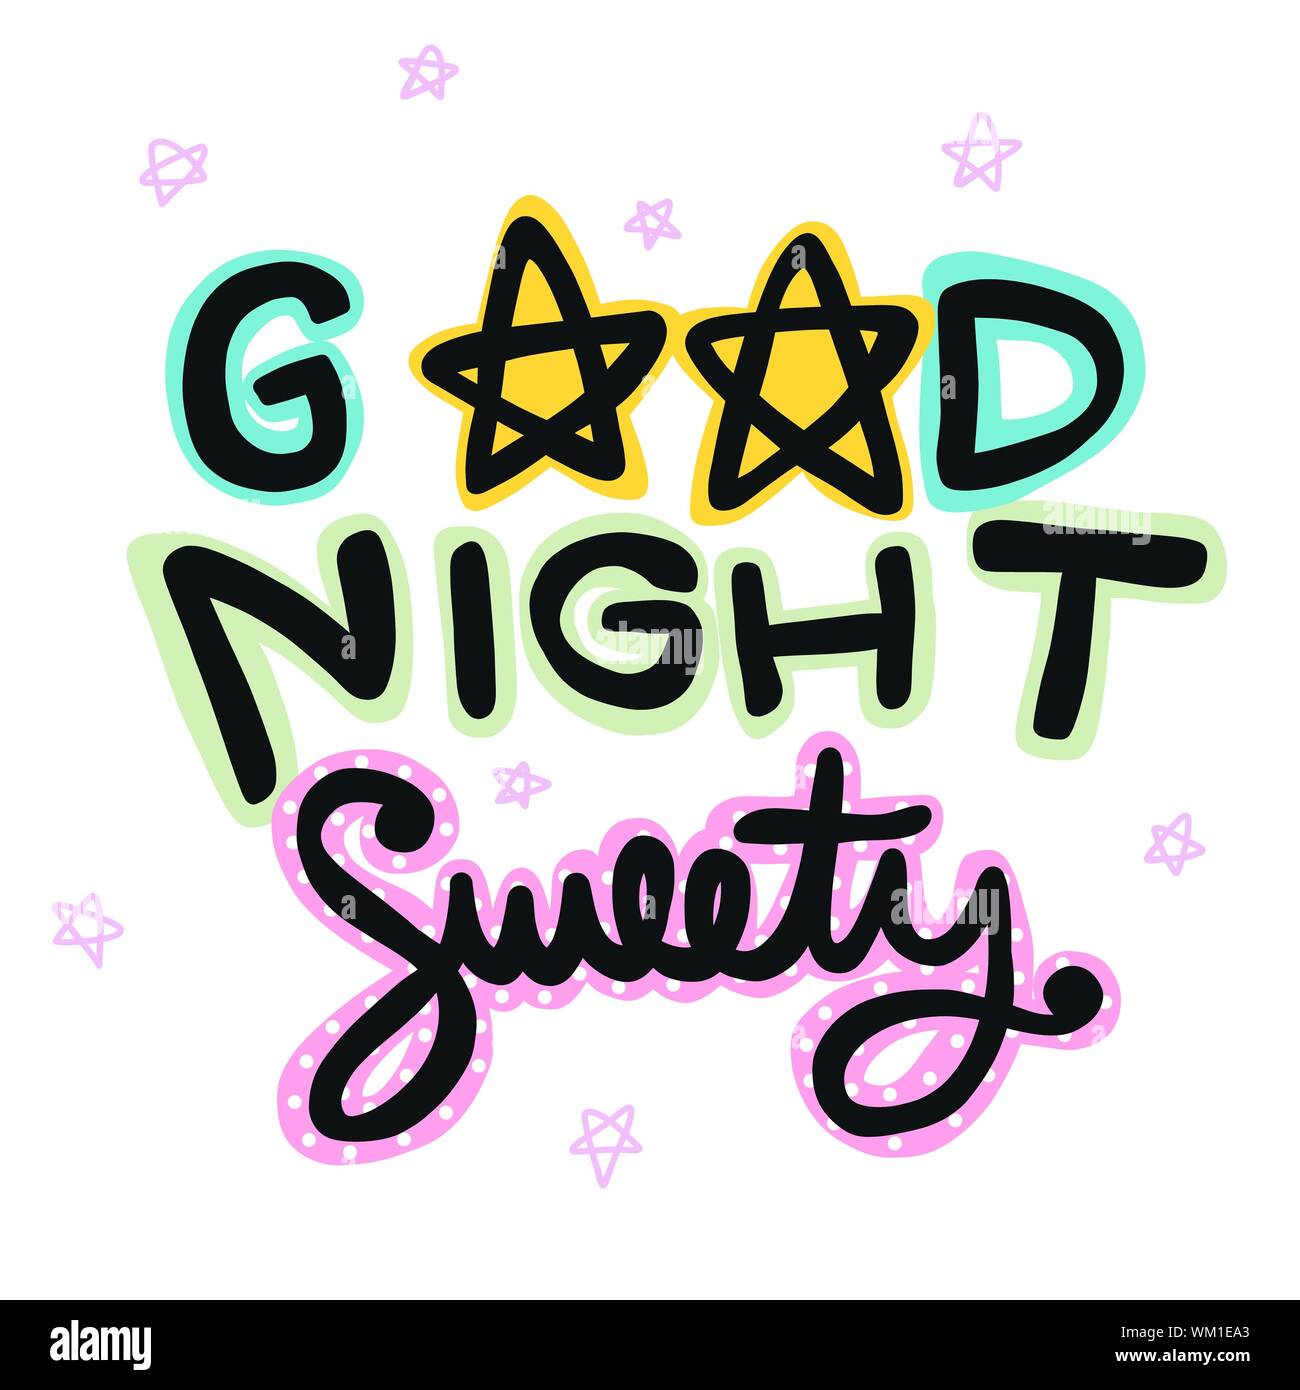 Good night sweety cute word and star vector illustration Stock Vector ...